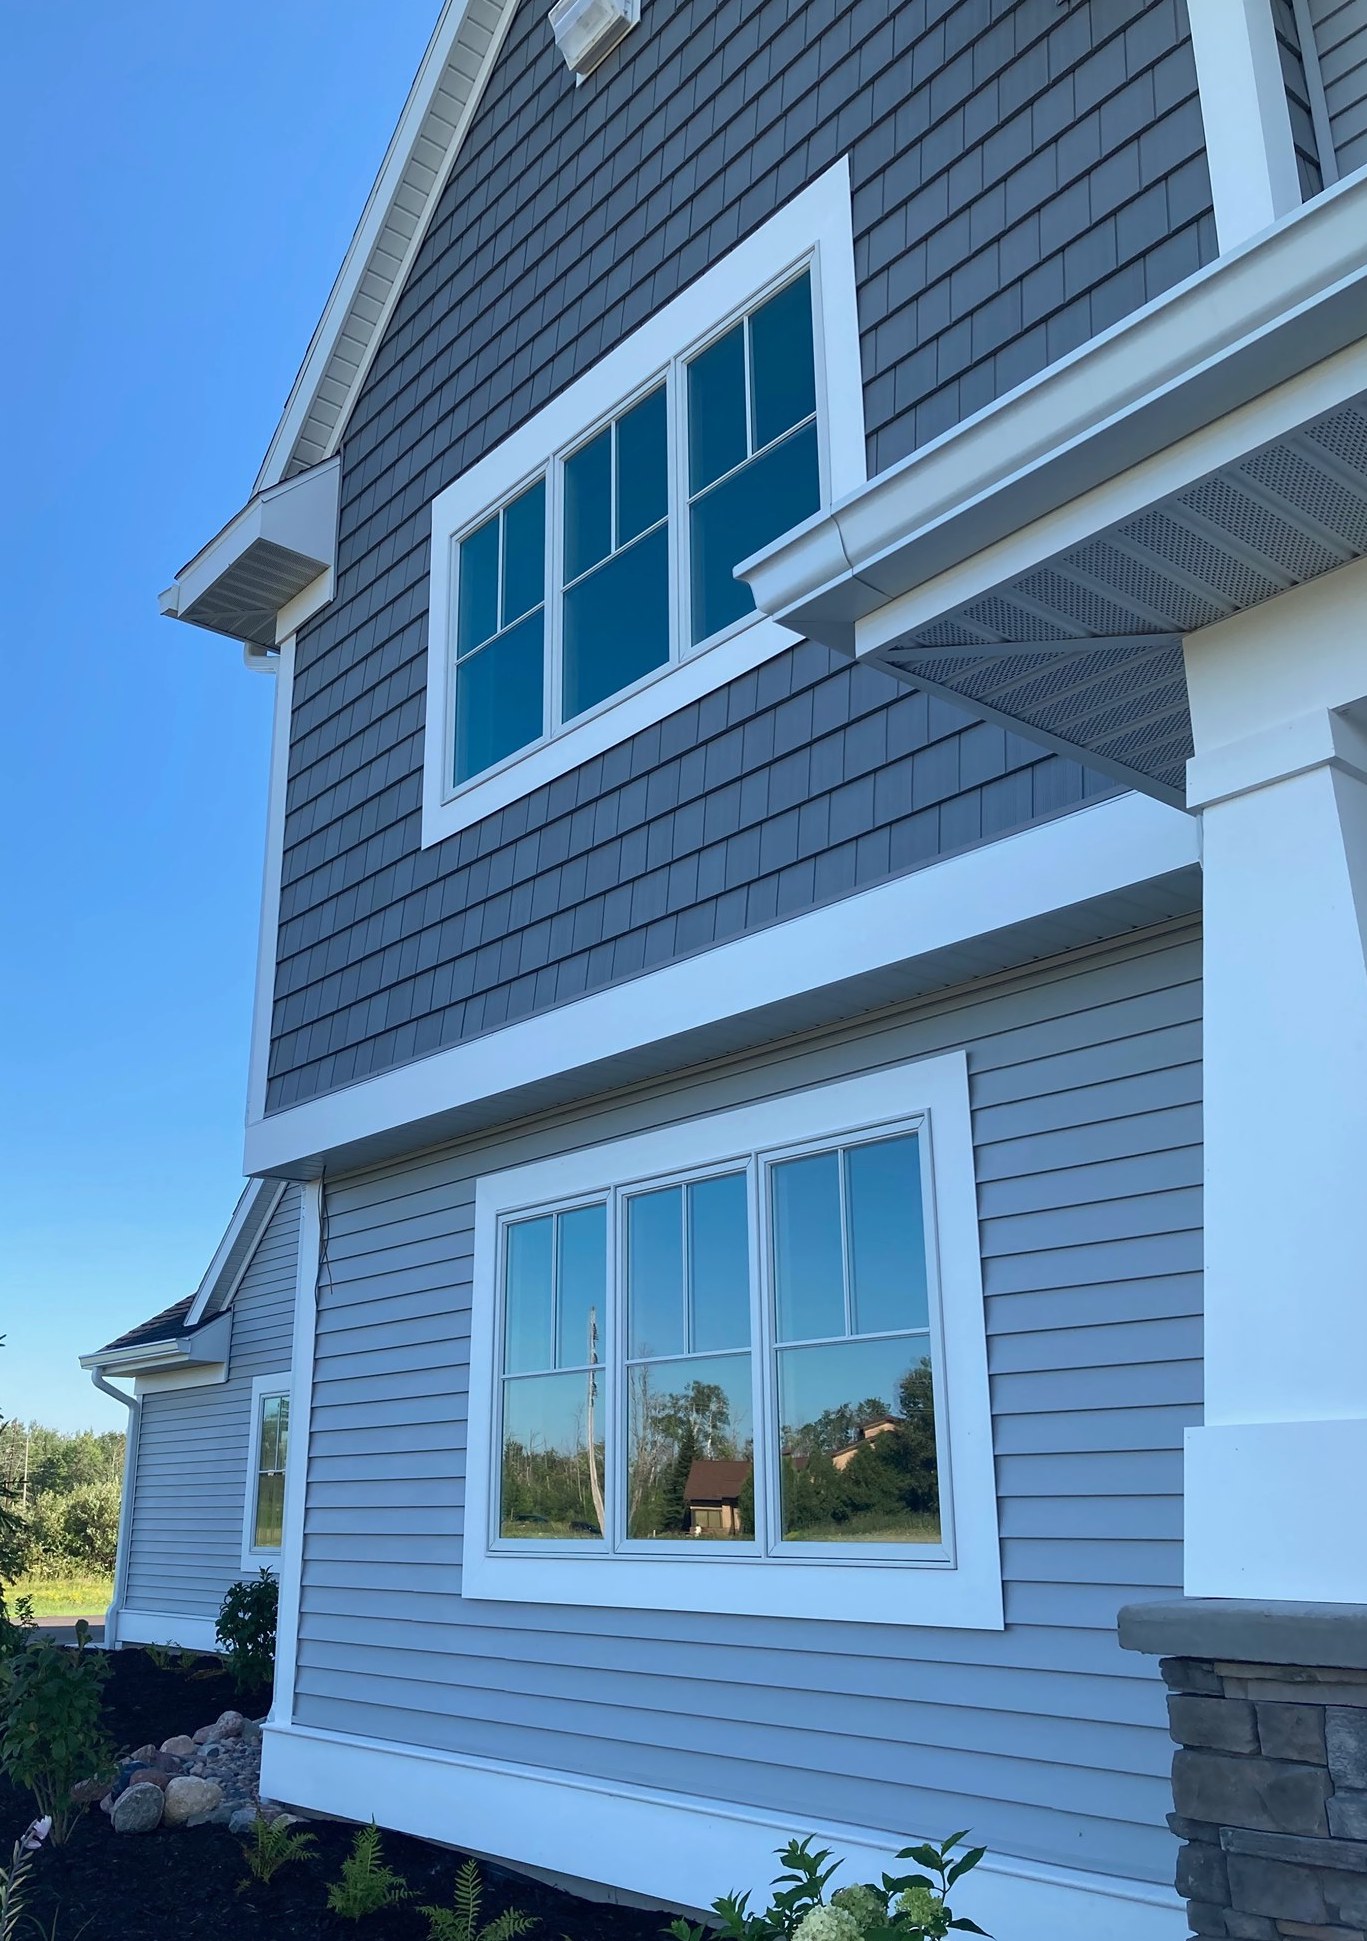 Foundry siding on the second floor blends with the first-floor hues to create a soothing-yet-elegant multi-textured look.